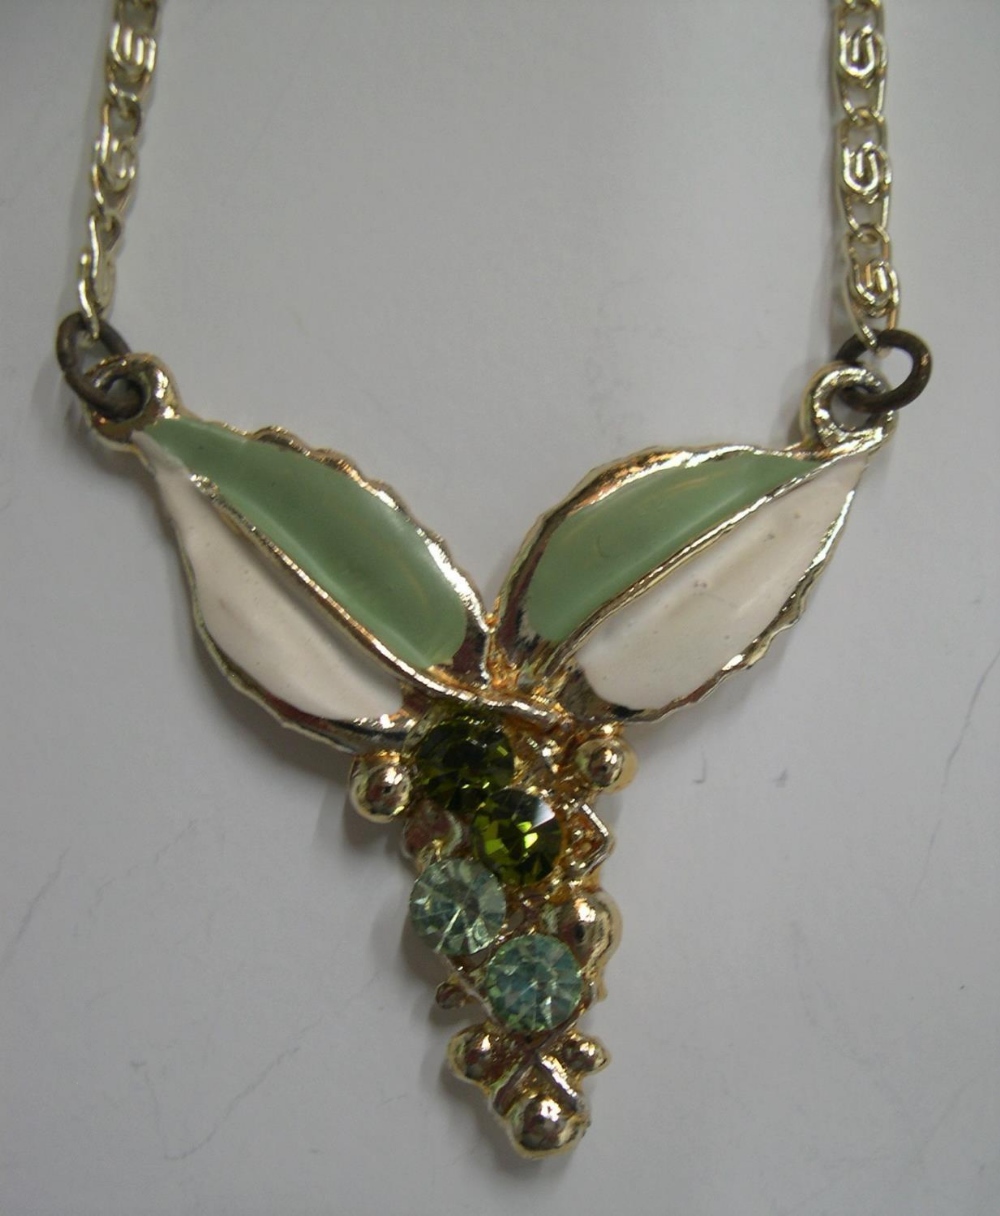 Rare 1920s French rose quartz silver pendent & a vintage ladies necklace and pendant (2) - Image 3 of 6